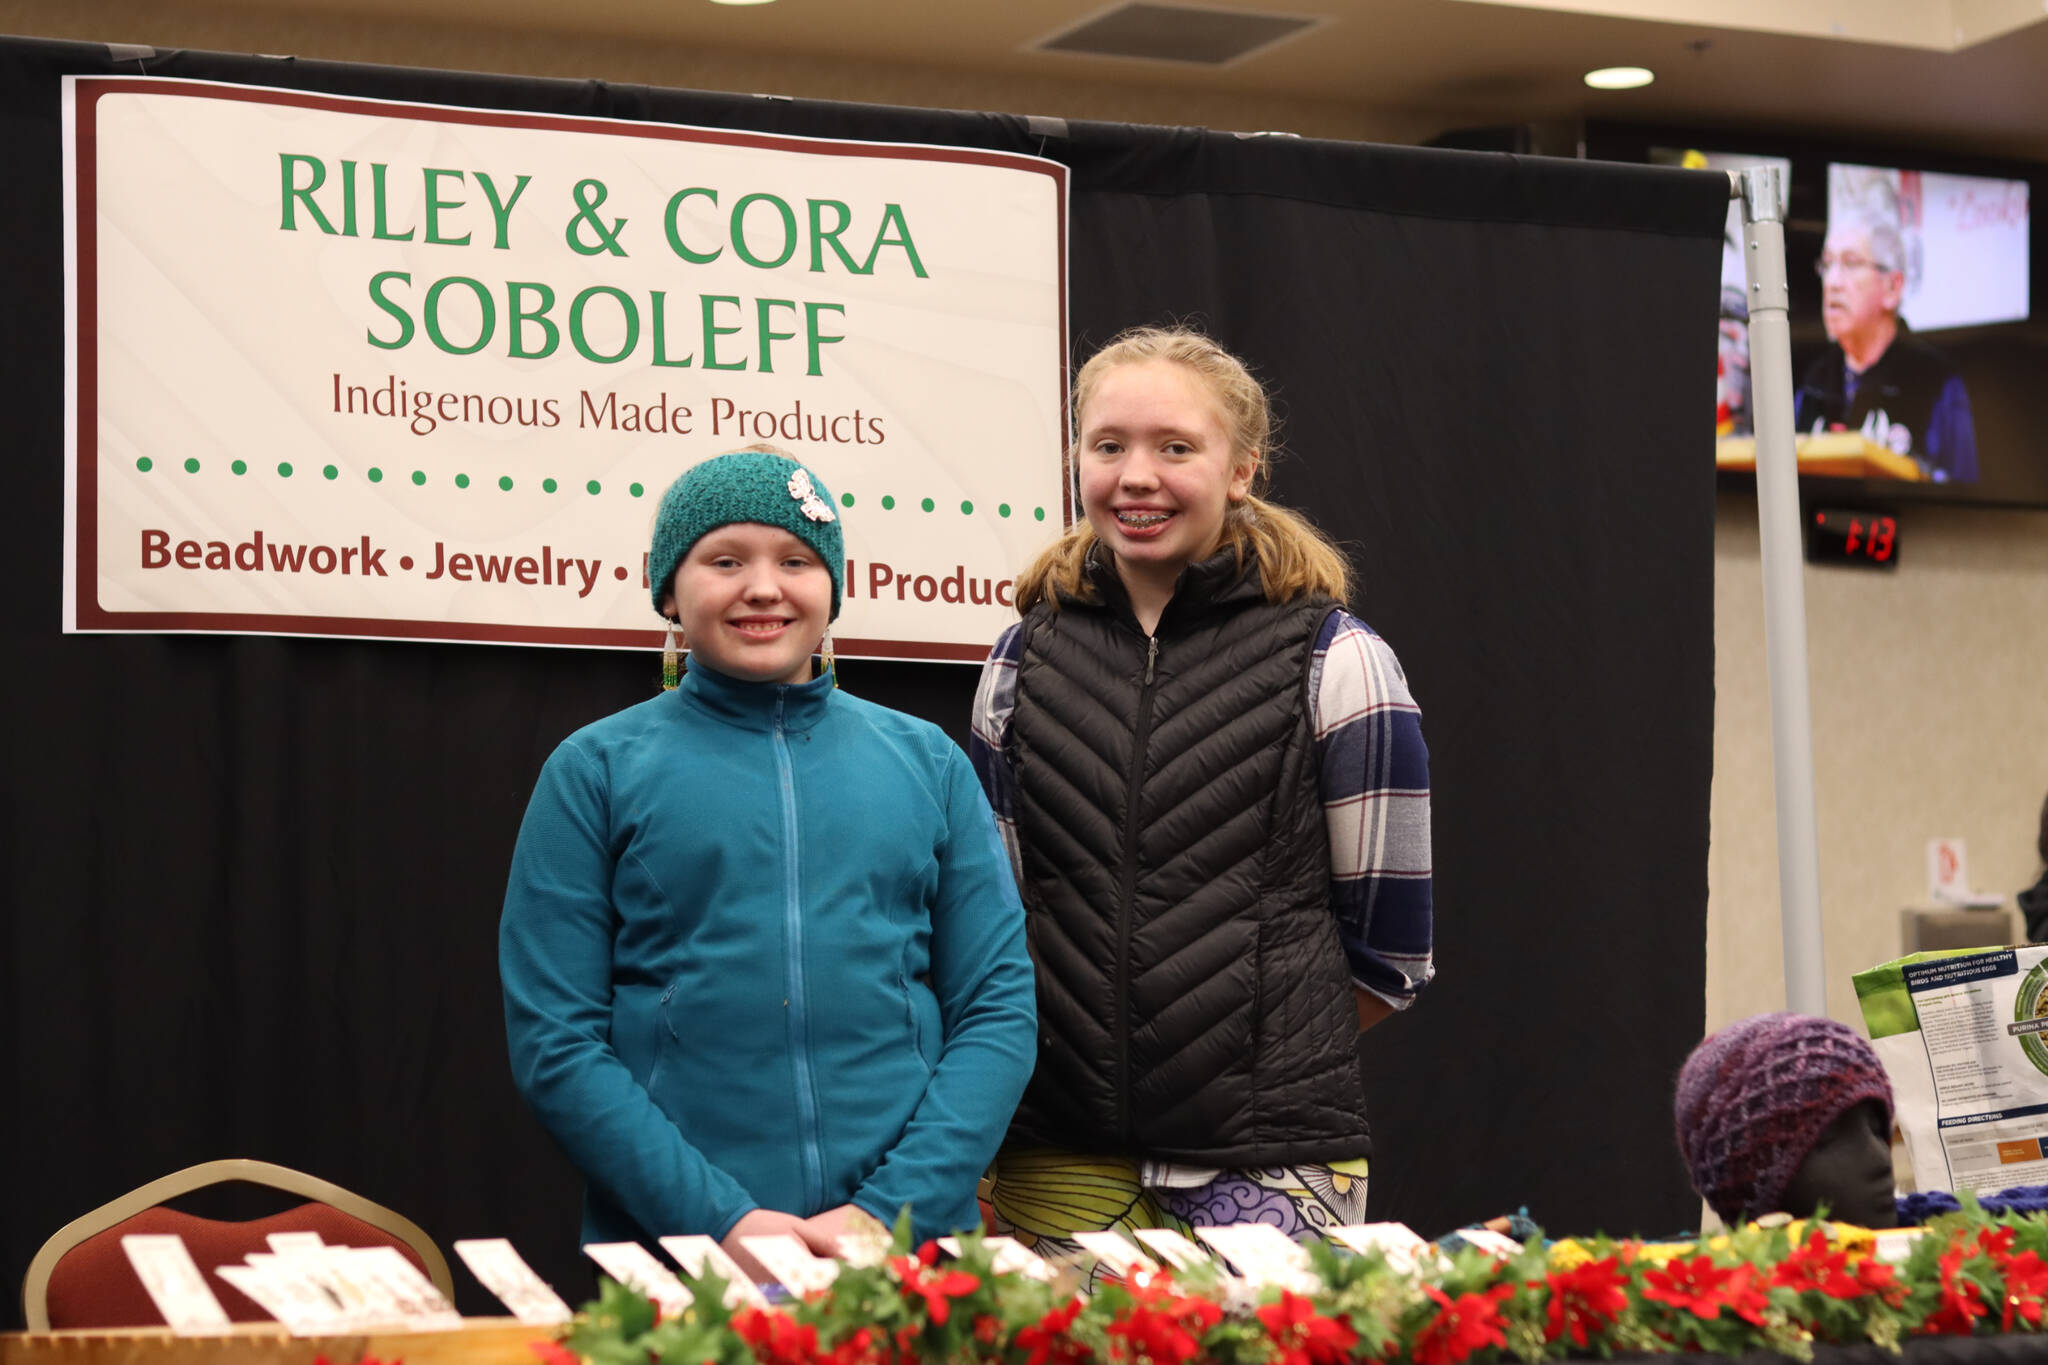 Sisters Riley and Cora Soboleff stand with their art booth which was featured for the first time at the Indigenous Artists & Vendors Holiday Market on Friday. The Dzantik’i Heeni Middle Schoolers make their own winter hats and assorted earrings. (Jonson Kuhn / Juneau Empire)